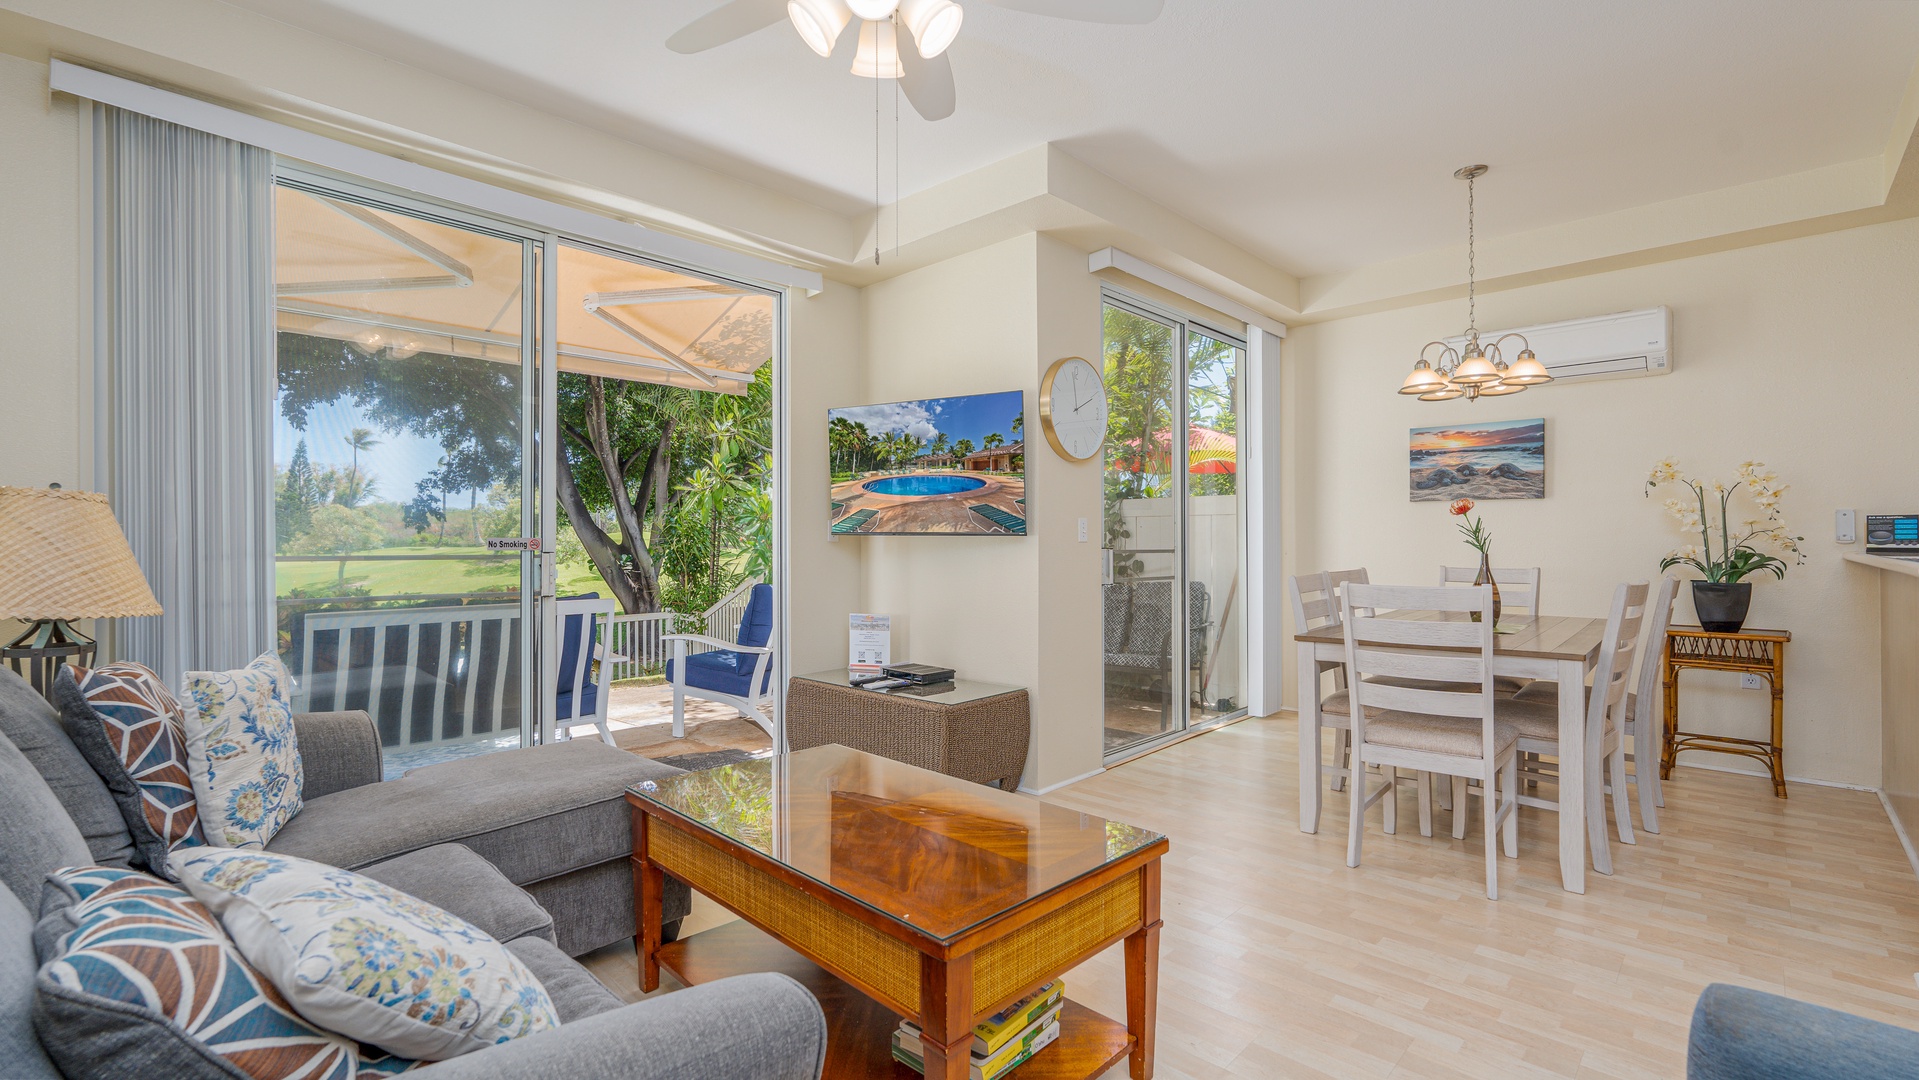 Kapolei Vacation Rentals, Fairways at Ko Olina 18C - The dining area includes an air conditioner above the dining table and sliding glass doors leading to the patio.